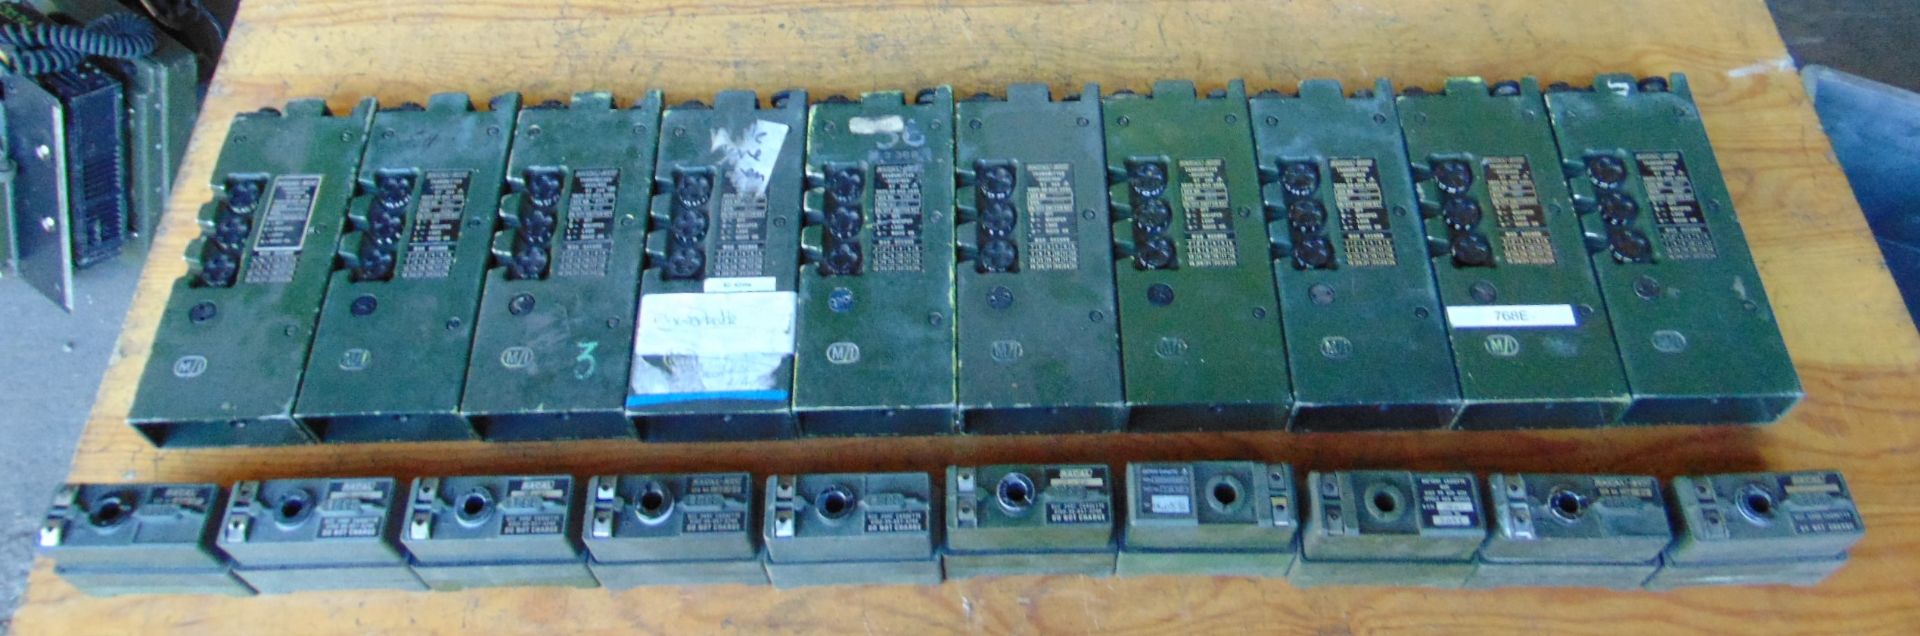 10 x Clansman UK/RT 349 Transmitter Receivers c/w Battery Pack - Image 2 of 3